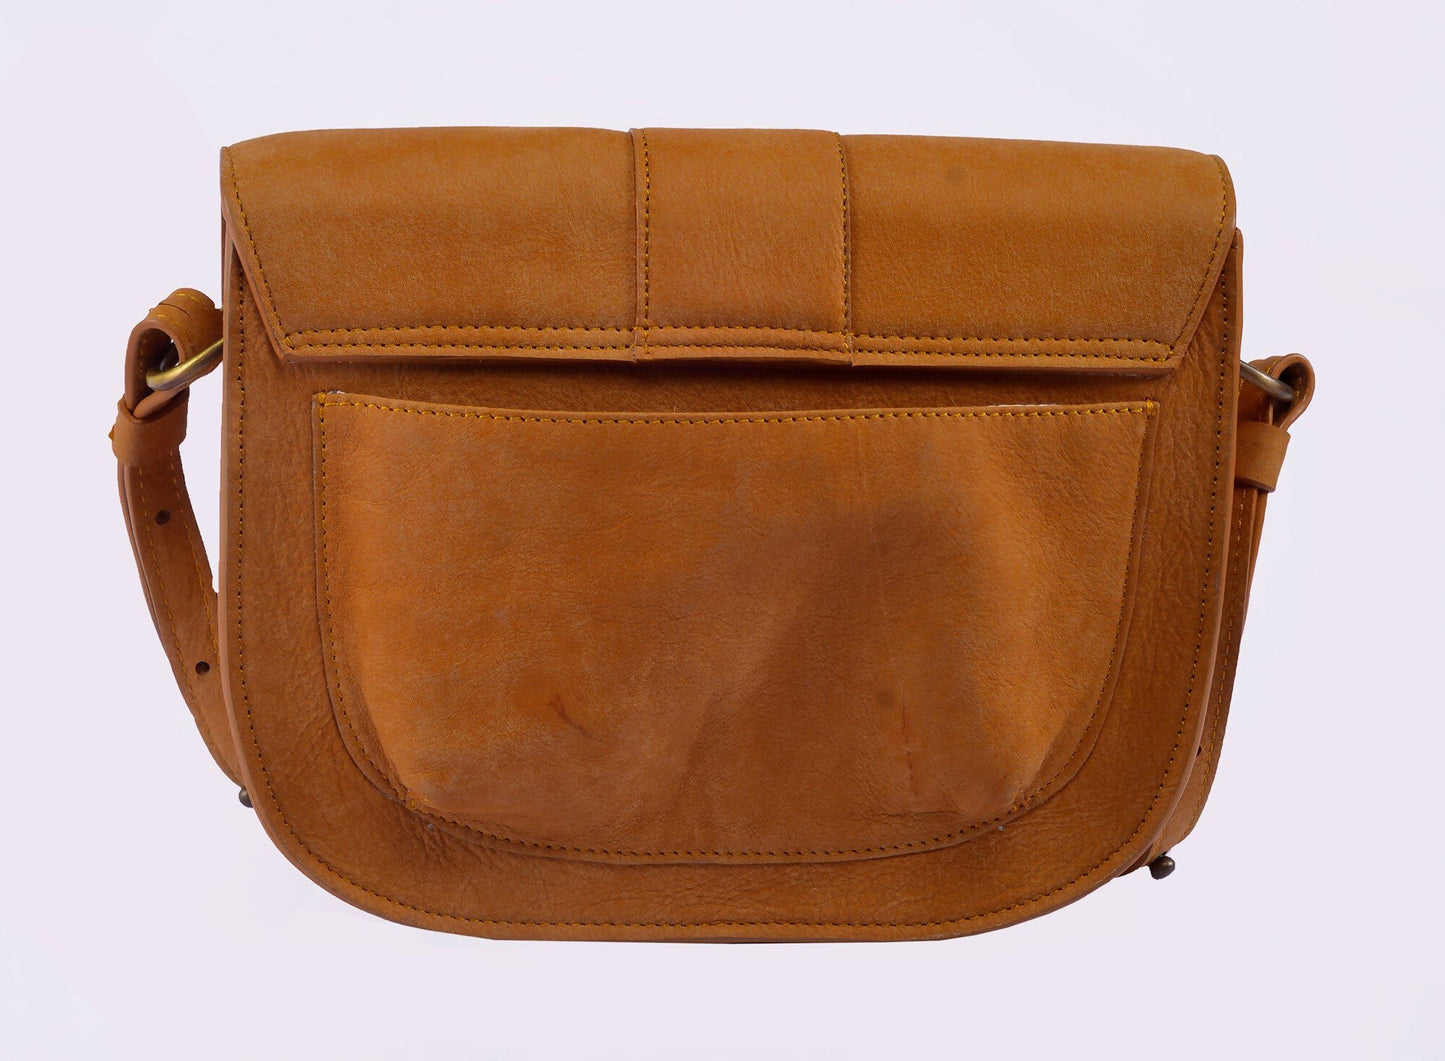 The Saddle Bag for your inner Cow Girl.